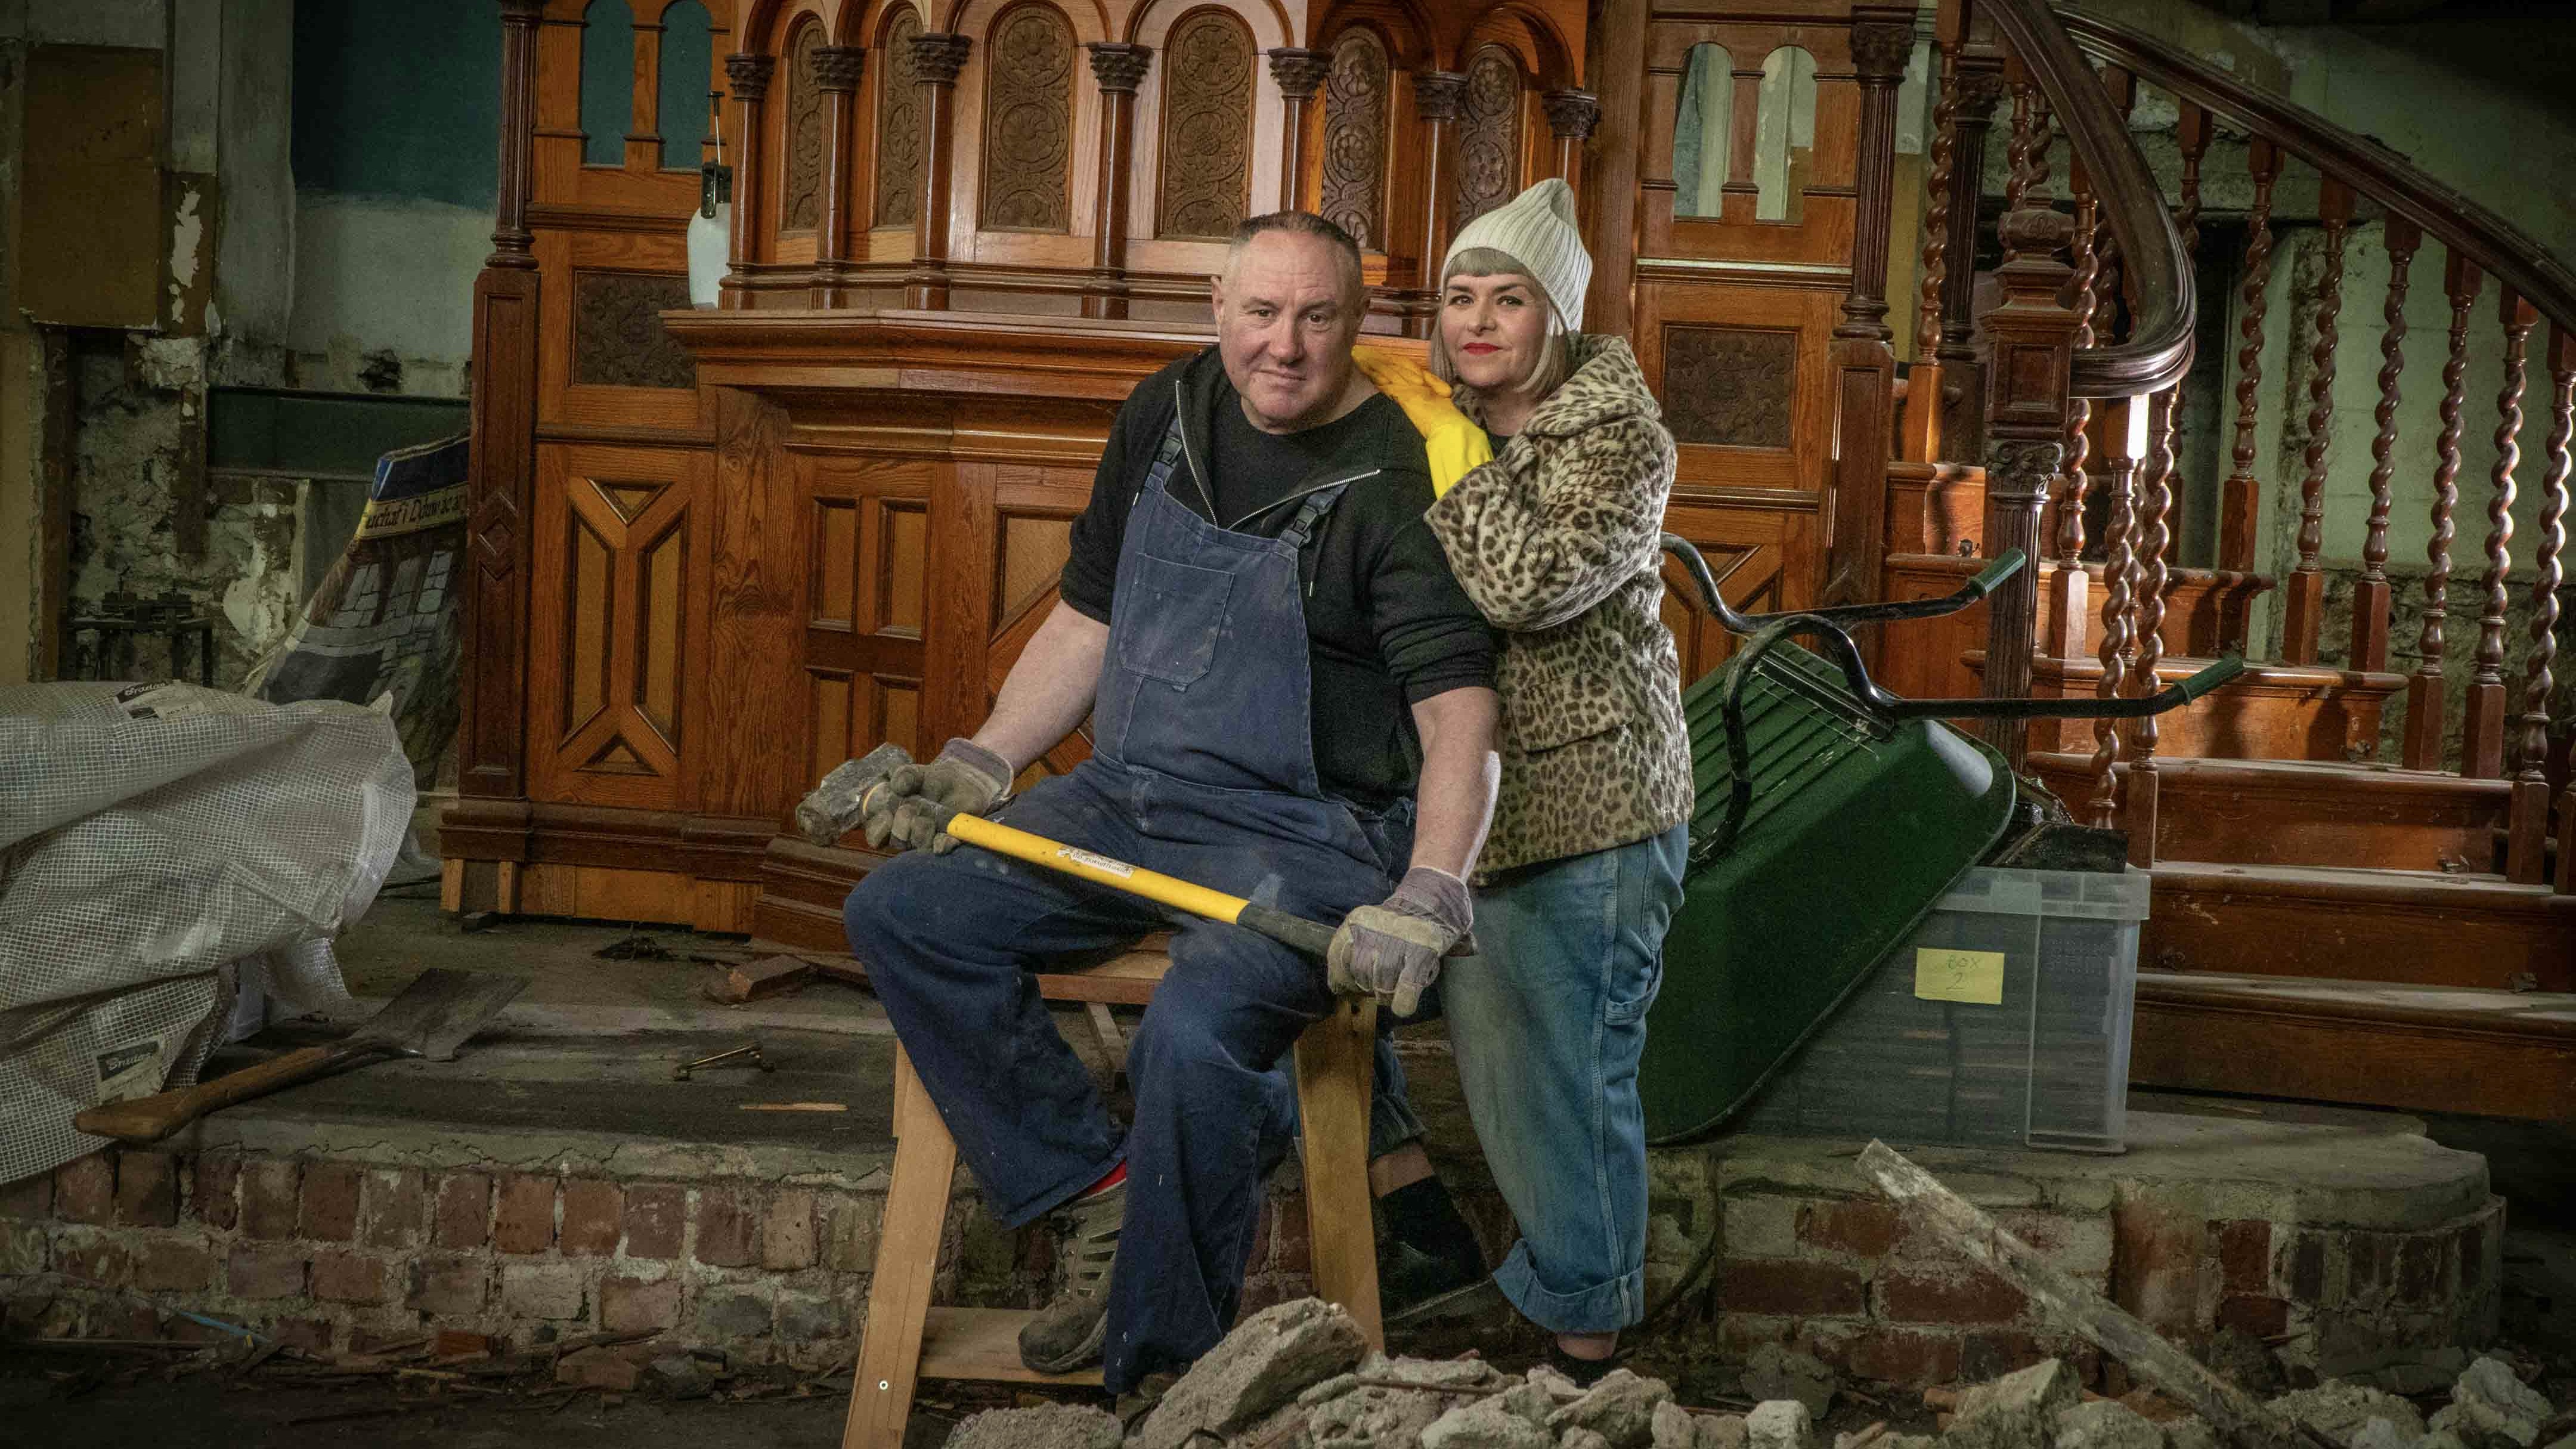 Keith Brymer Jones seated holding a hammer and Marj Hogarth standing in front of the pulpit amid rubble in Our Welsh Chapel Dream